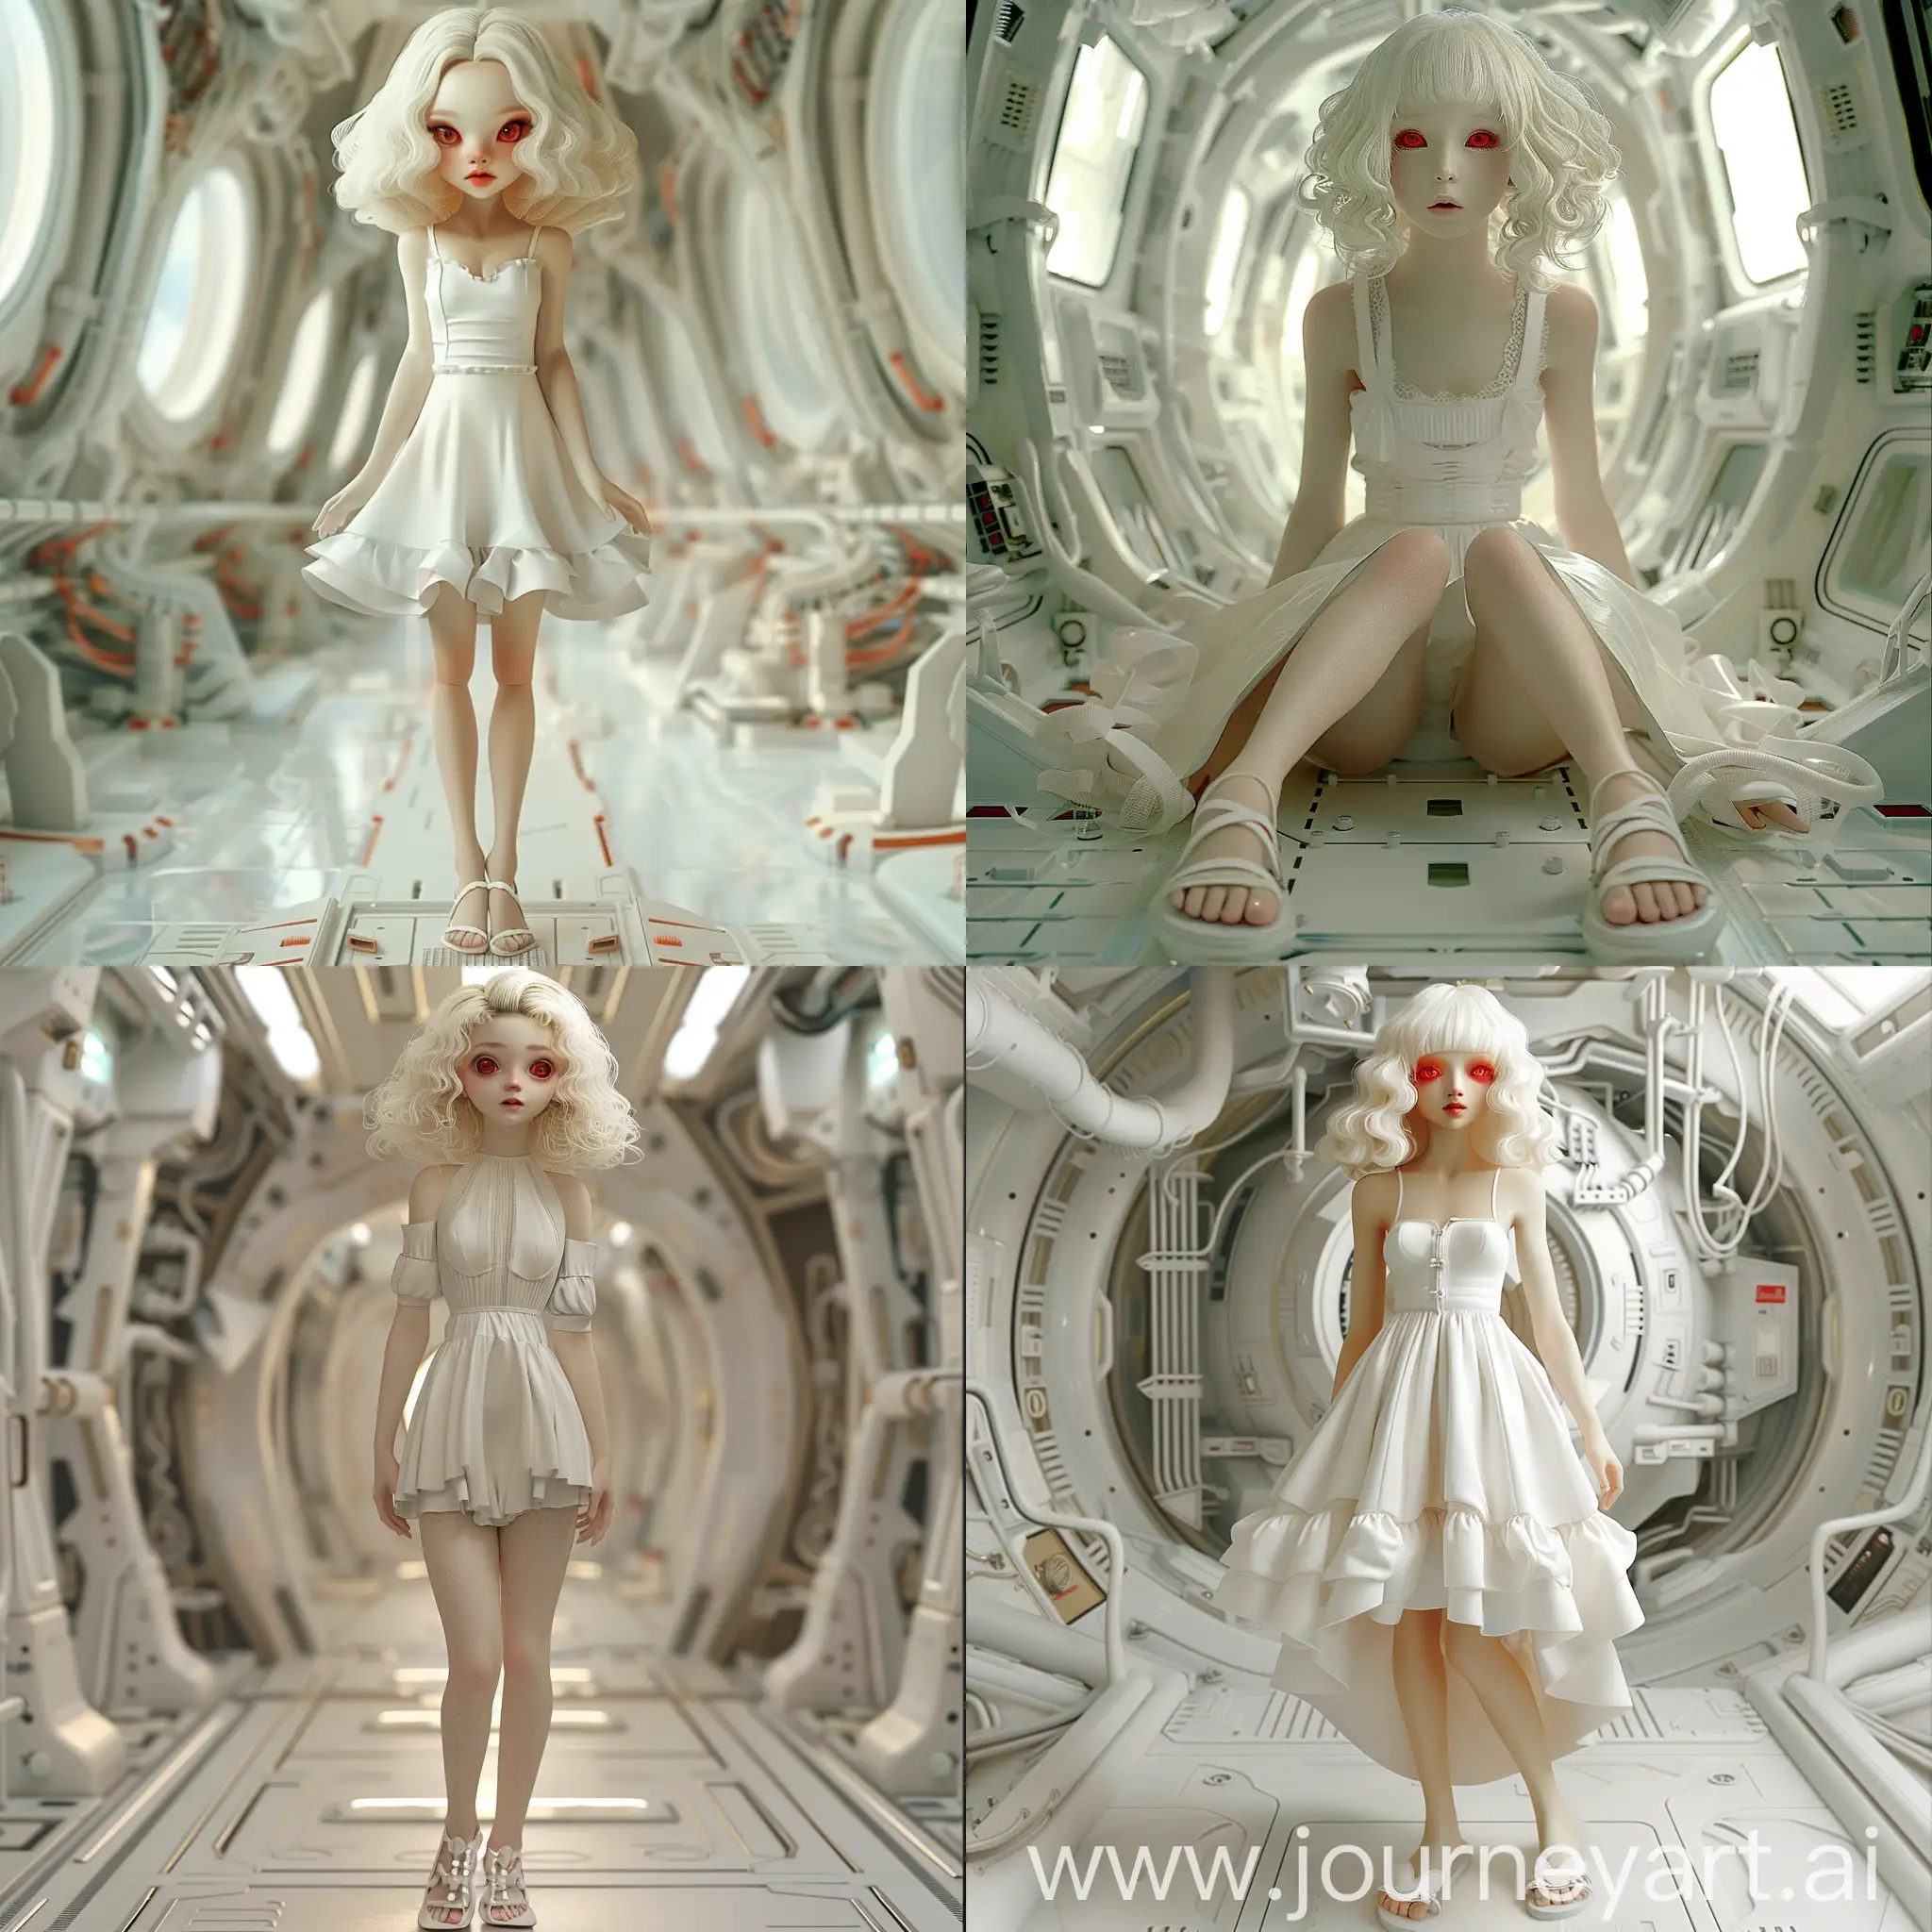 a most innocent and youthful-looking beauty with large sensual red eyes,  shoulder-length styled into soft gentle curls of blonde hair, pale skin, flexible lithe hourglass figure, large hips and chest - Wearing a simple yet elegant white sundress with dainty white sandals.

High Quality, 8k, 4k, White Space Station Background, Sci-fi, 3D, Sci-fi, space station background, detailed, HD.